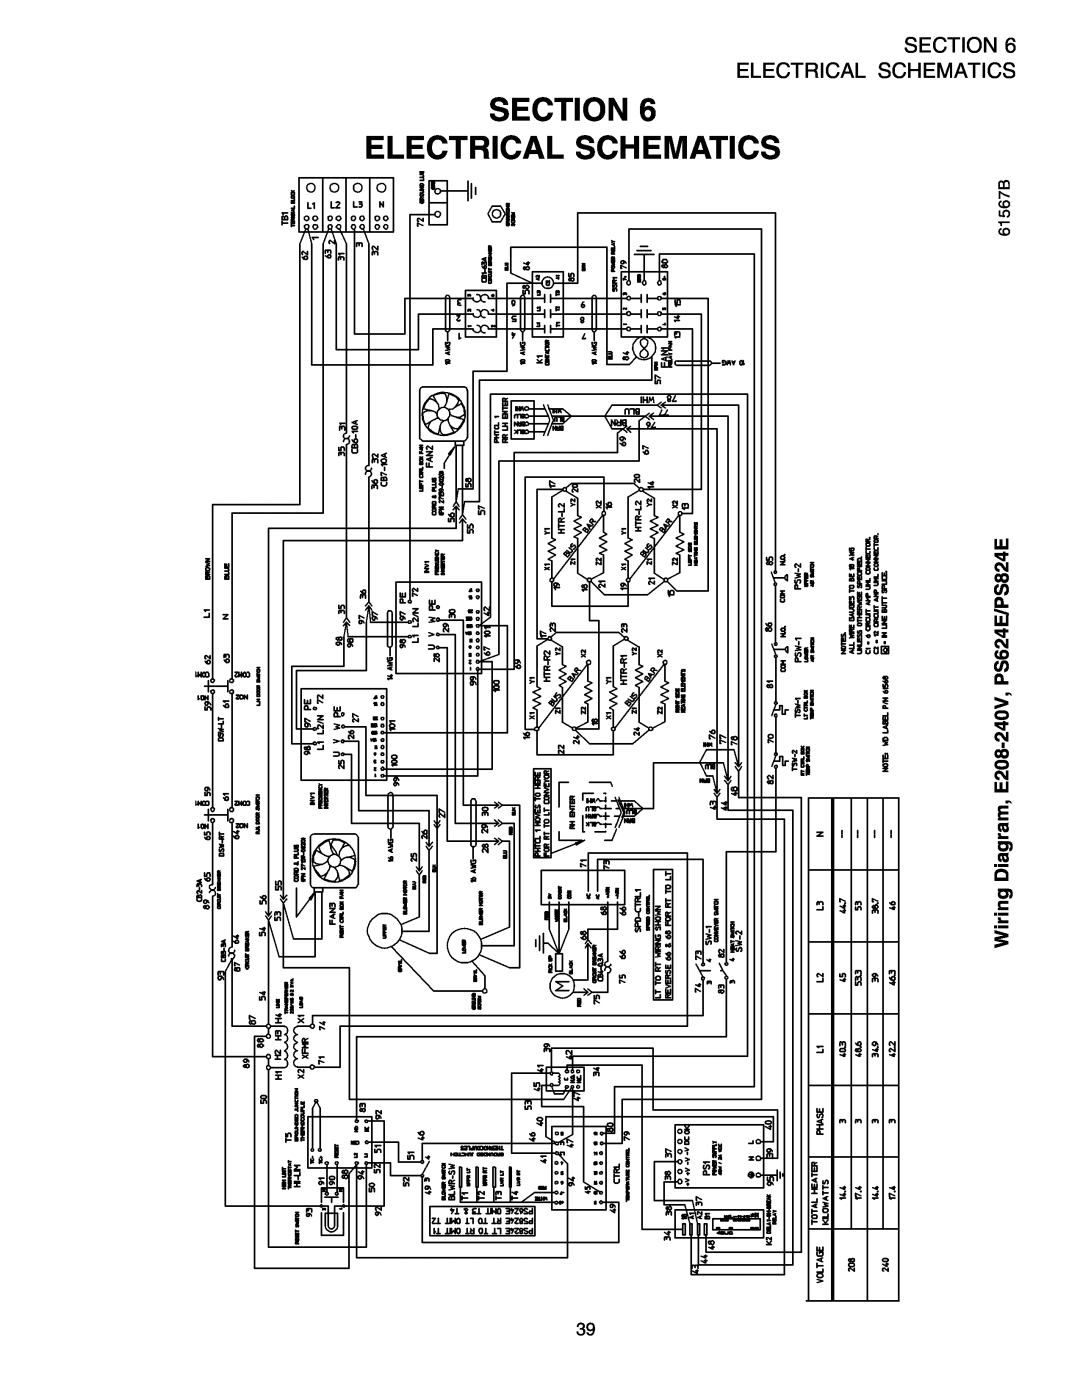 Middleby Marshall installation manual Section Electrical Schematics, Wiring Diagram, E208-240V, PS624E/PS824E, 61567B 